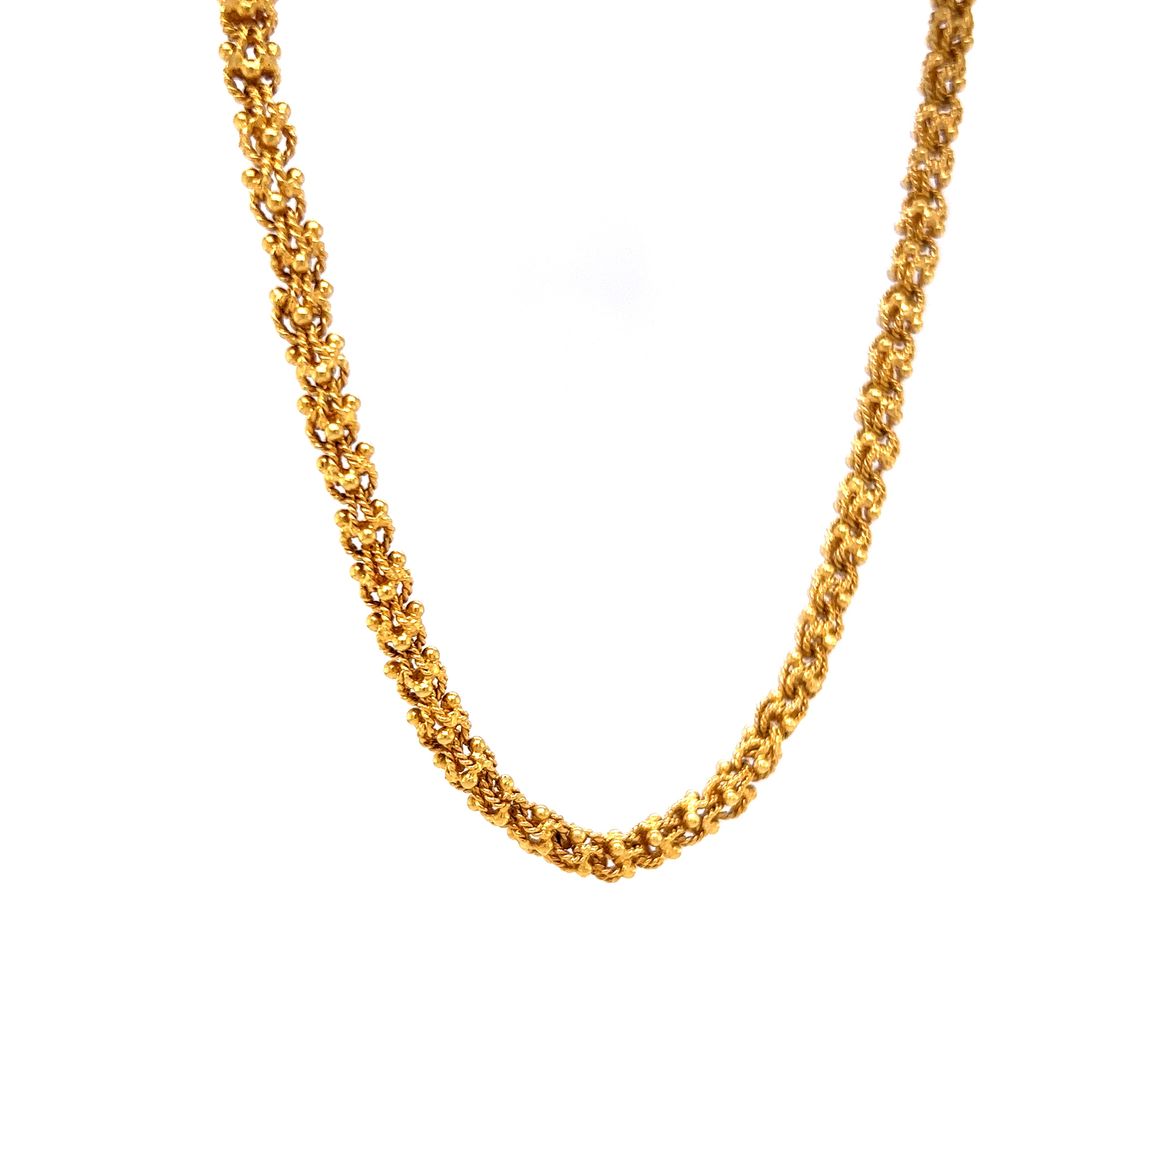 20" Textured Necklace in 18k Yellow Gold